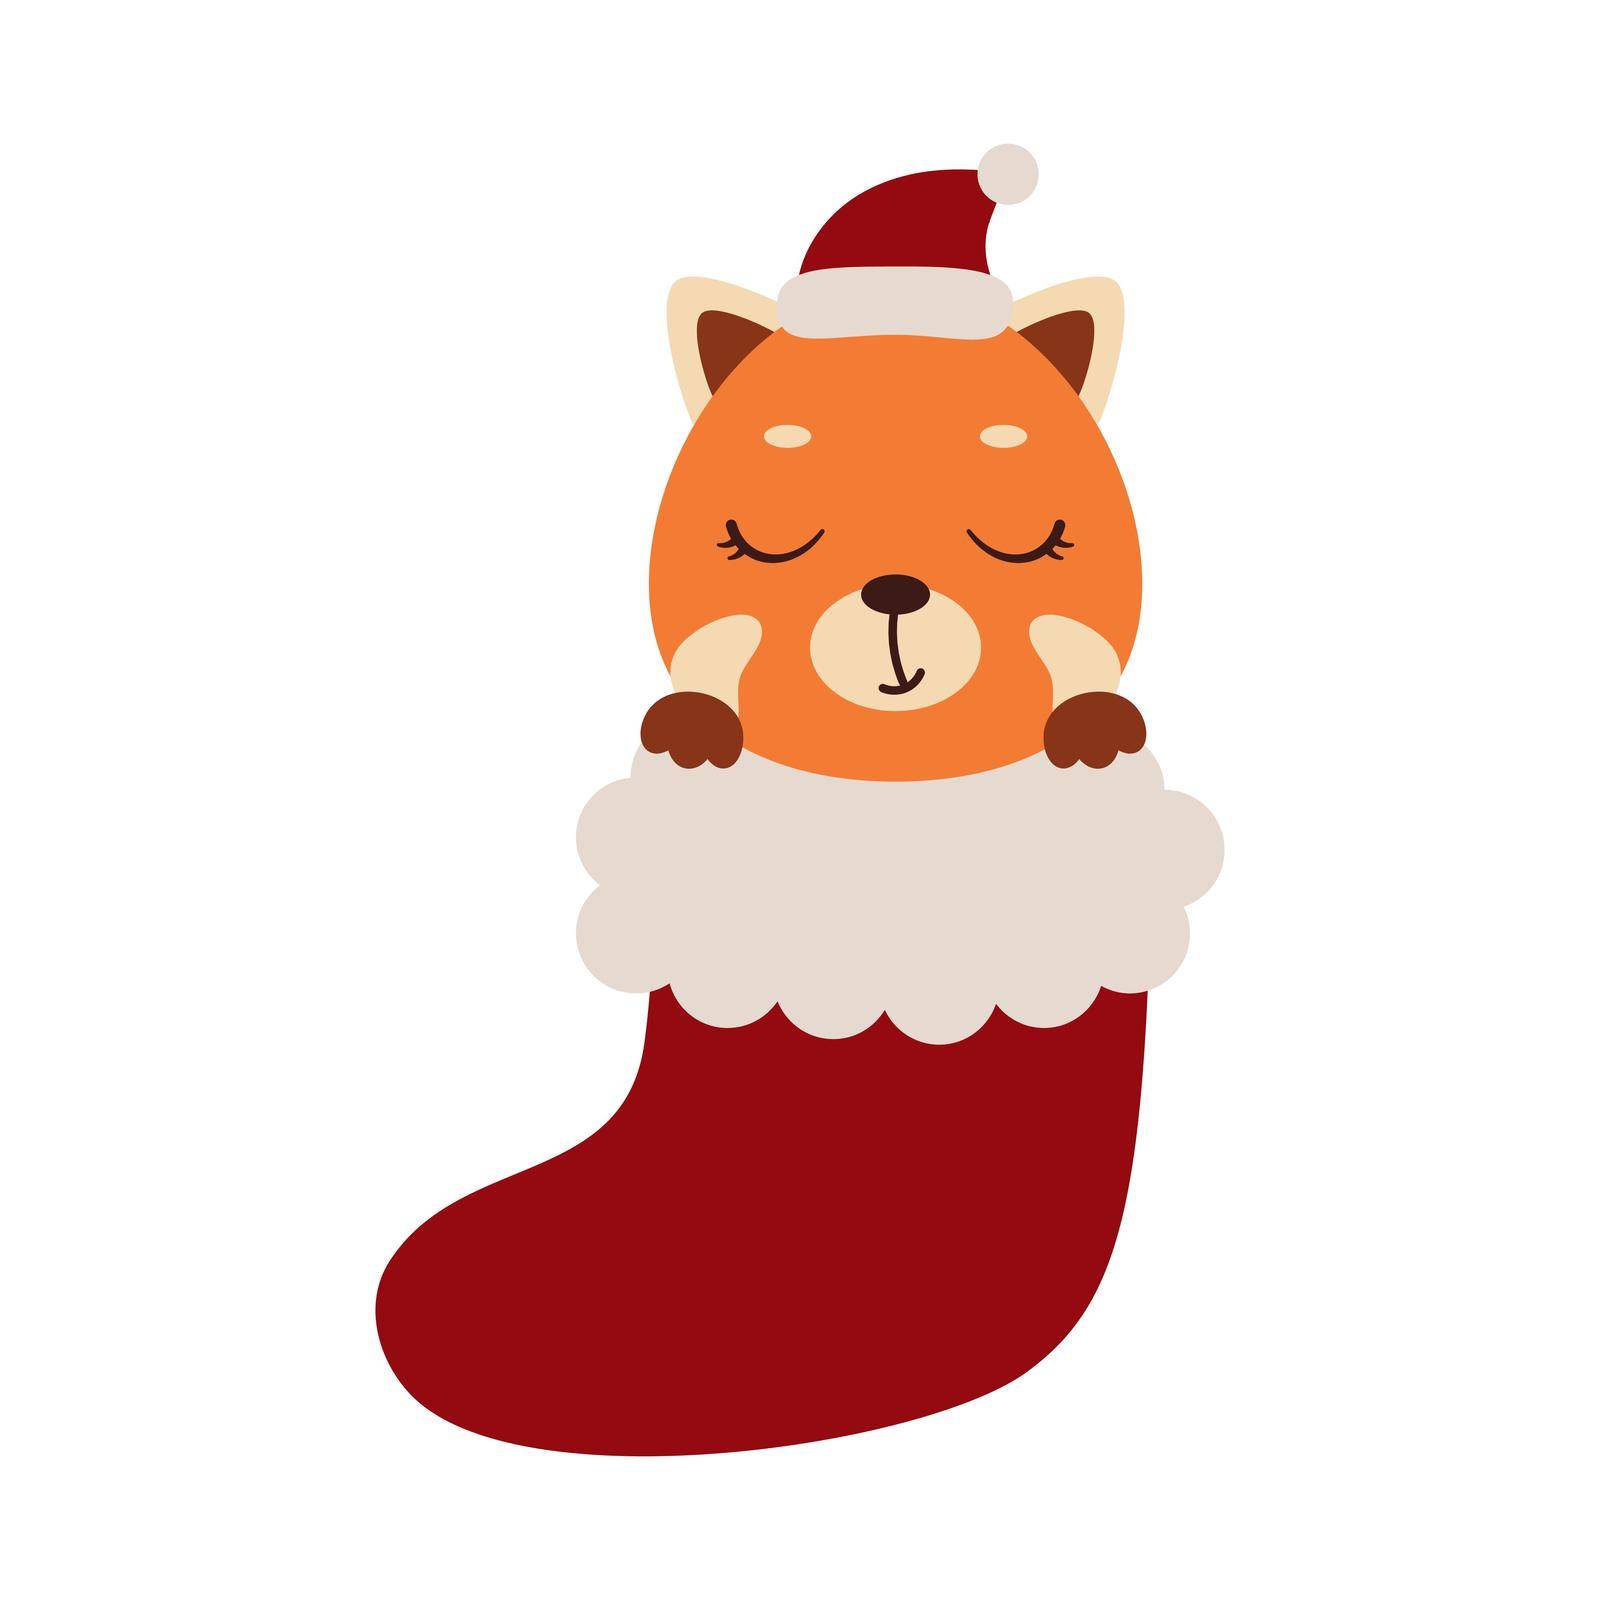 Cute little red panda in Christmas sock. Cartoon animal character for kids cards, baby shower, invitation, poster, t-shirt composition, house interior. Vector stock illustration.